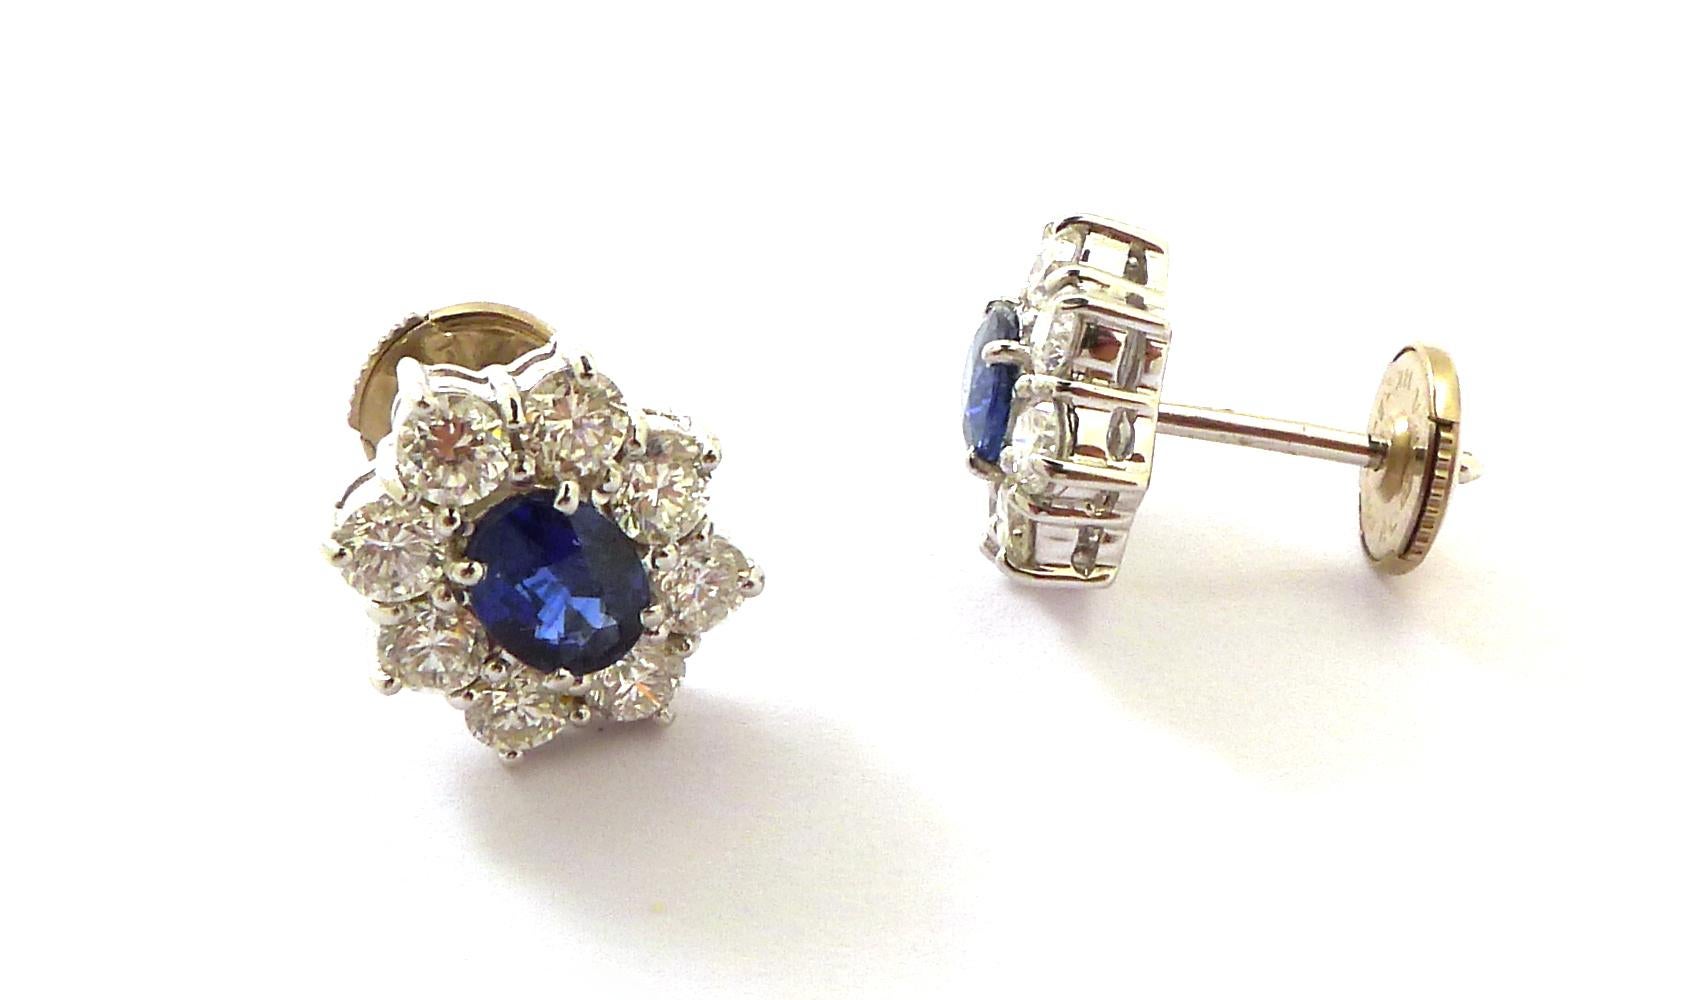 Centering an oval shaped sapphire surrounded by round brilliant diamonds

Mounted in 18k white gold

- 2 sapphires: 1.50cts total 
- 16 round brilliant diamonds: 1.50cts
- Gold: 4.11 grs
- Total weight of the item: 4.71 grs
